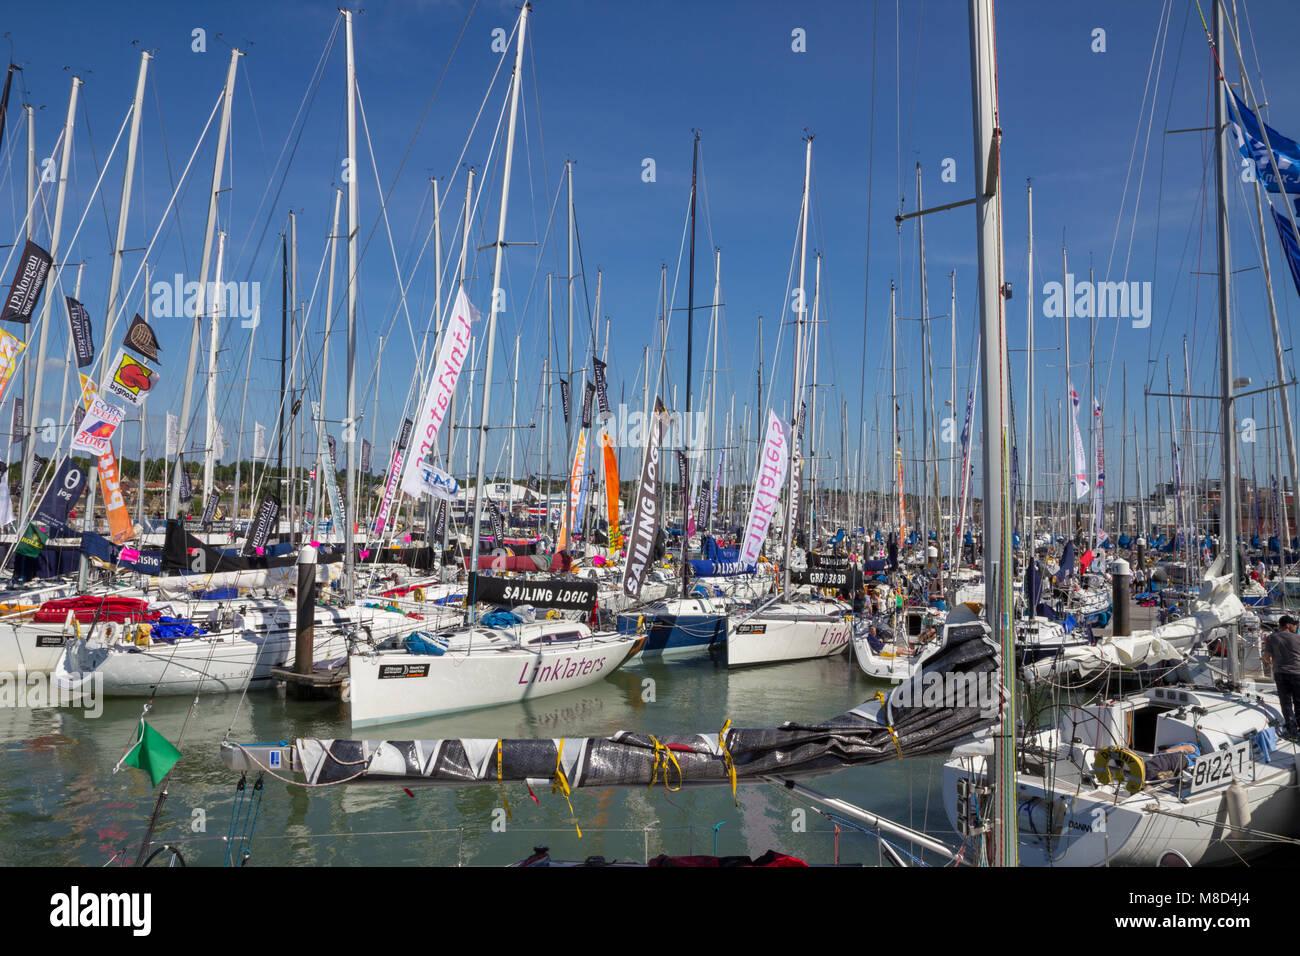 Packed Marina at Cowes Yacht Haven on Round the Island Race Day, Cwoes, Isle of Wight, UK Stock Photo